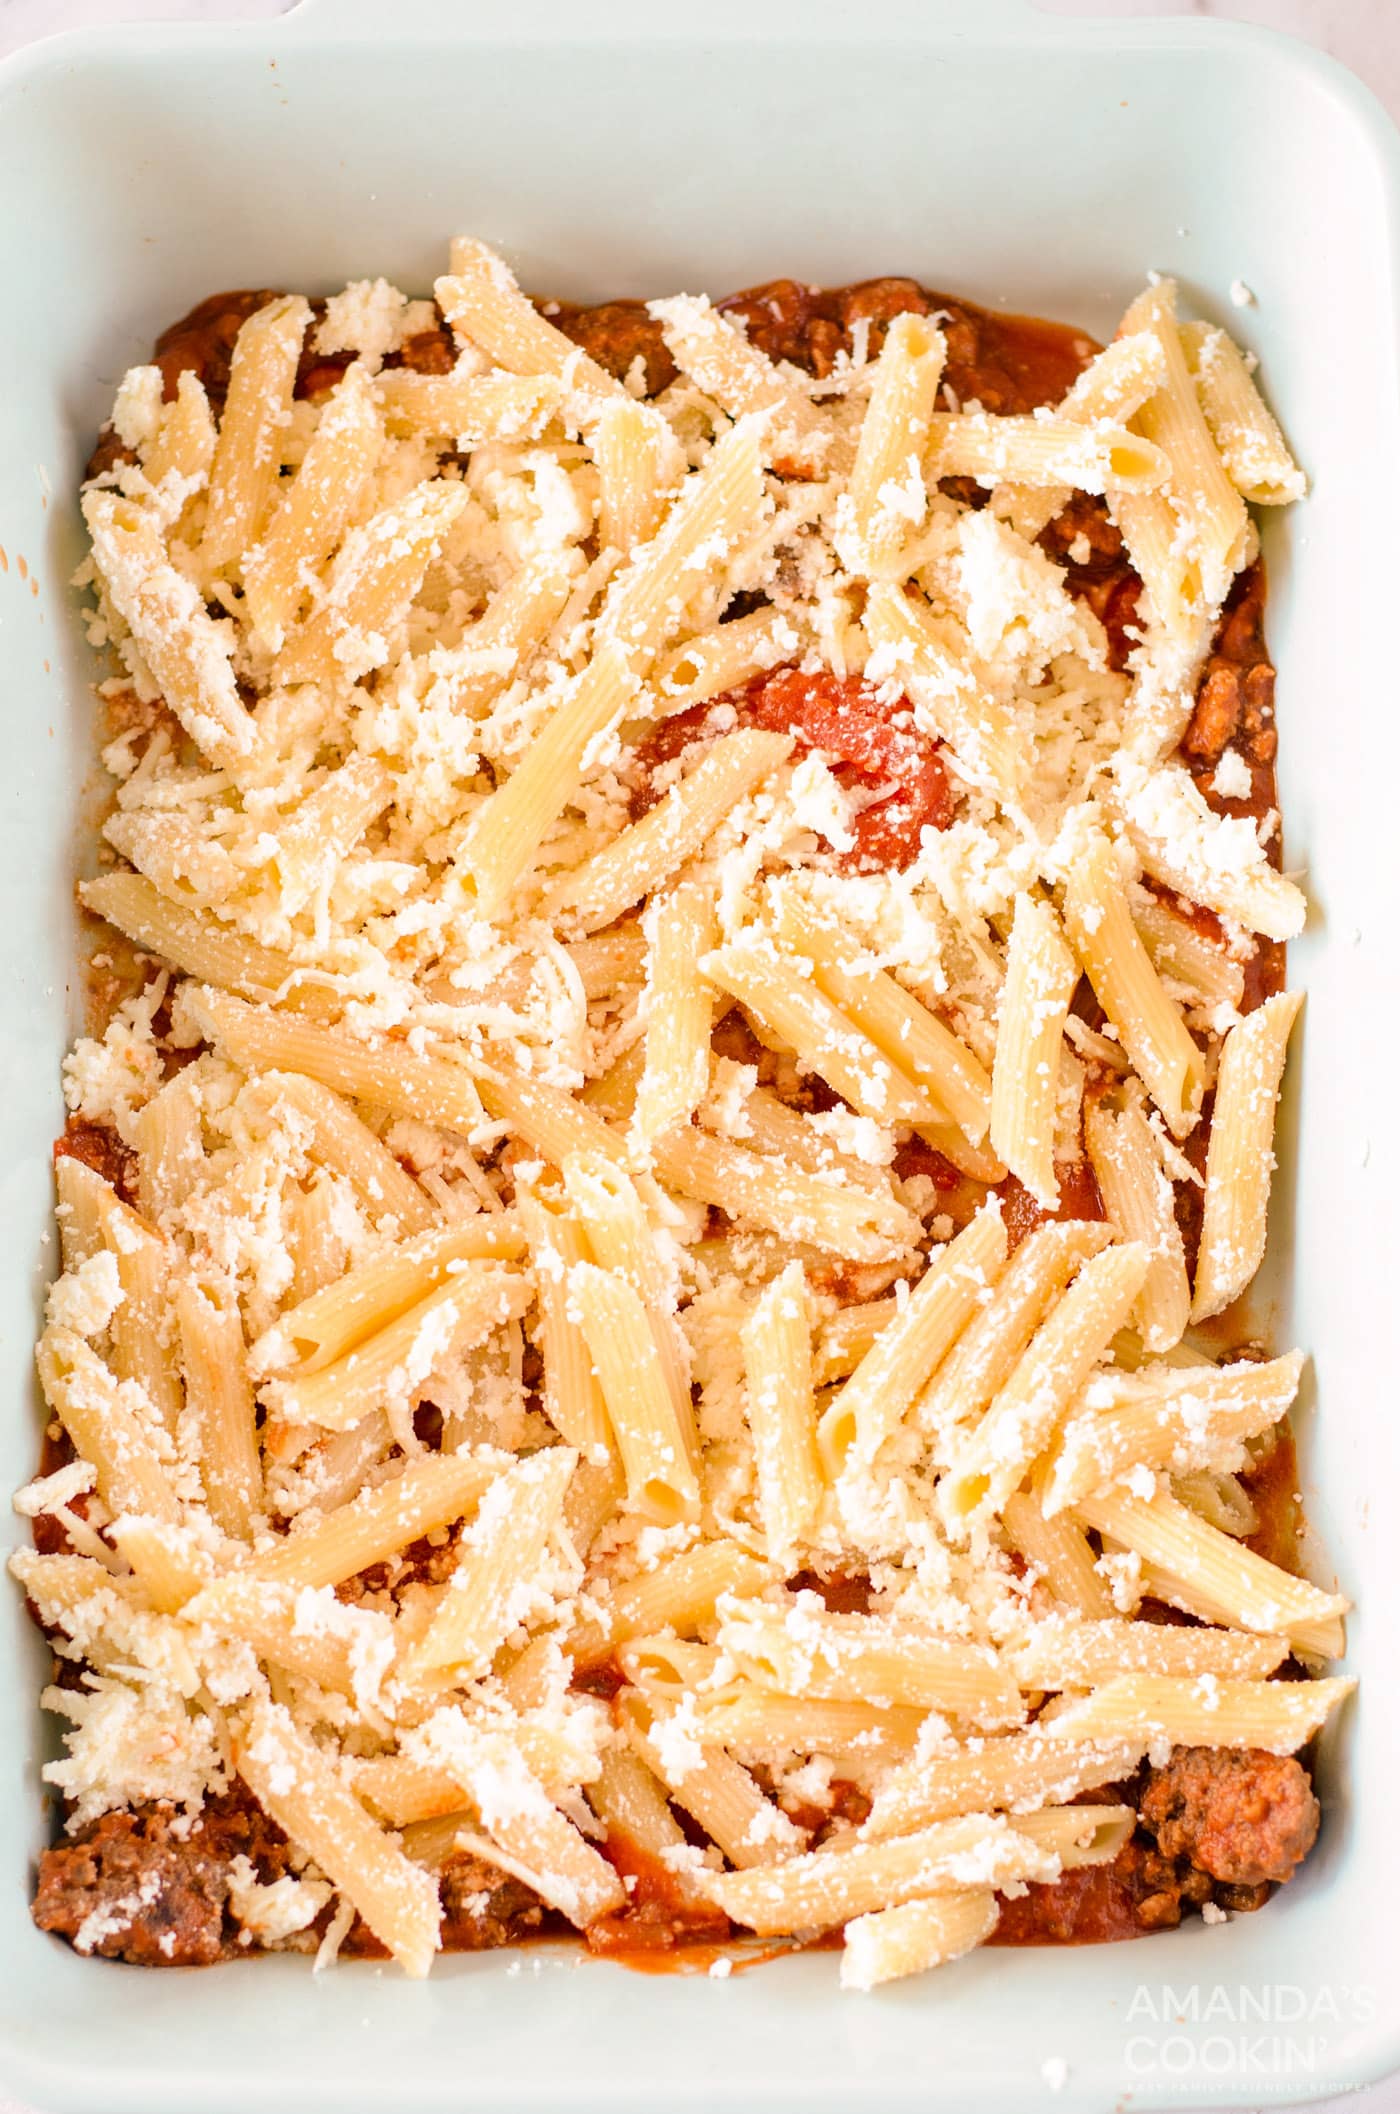 cheese and pasta mixture over meat sauce in casserole dish